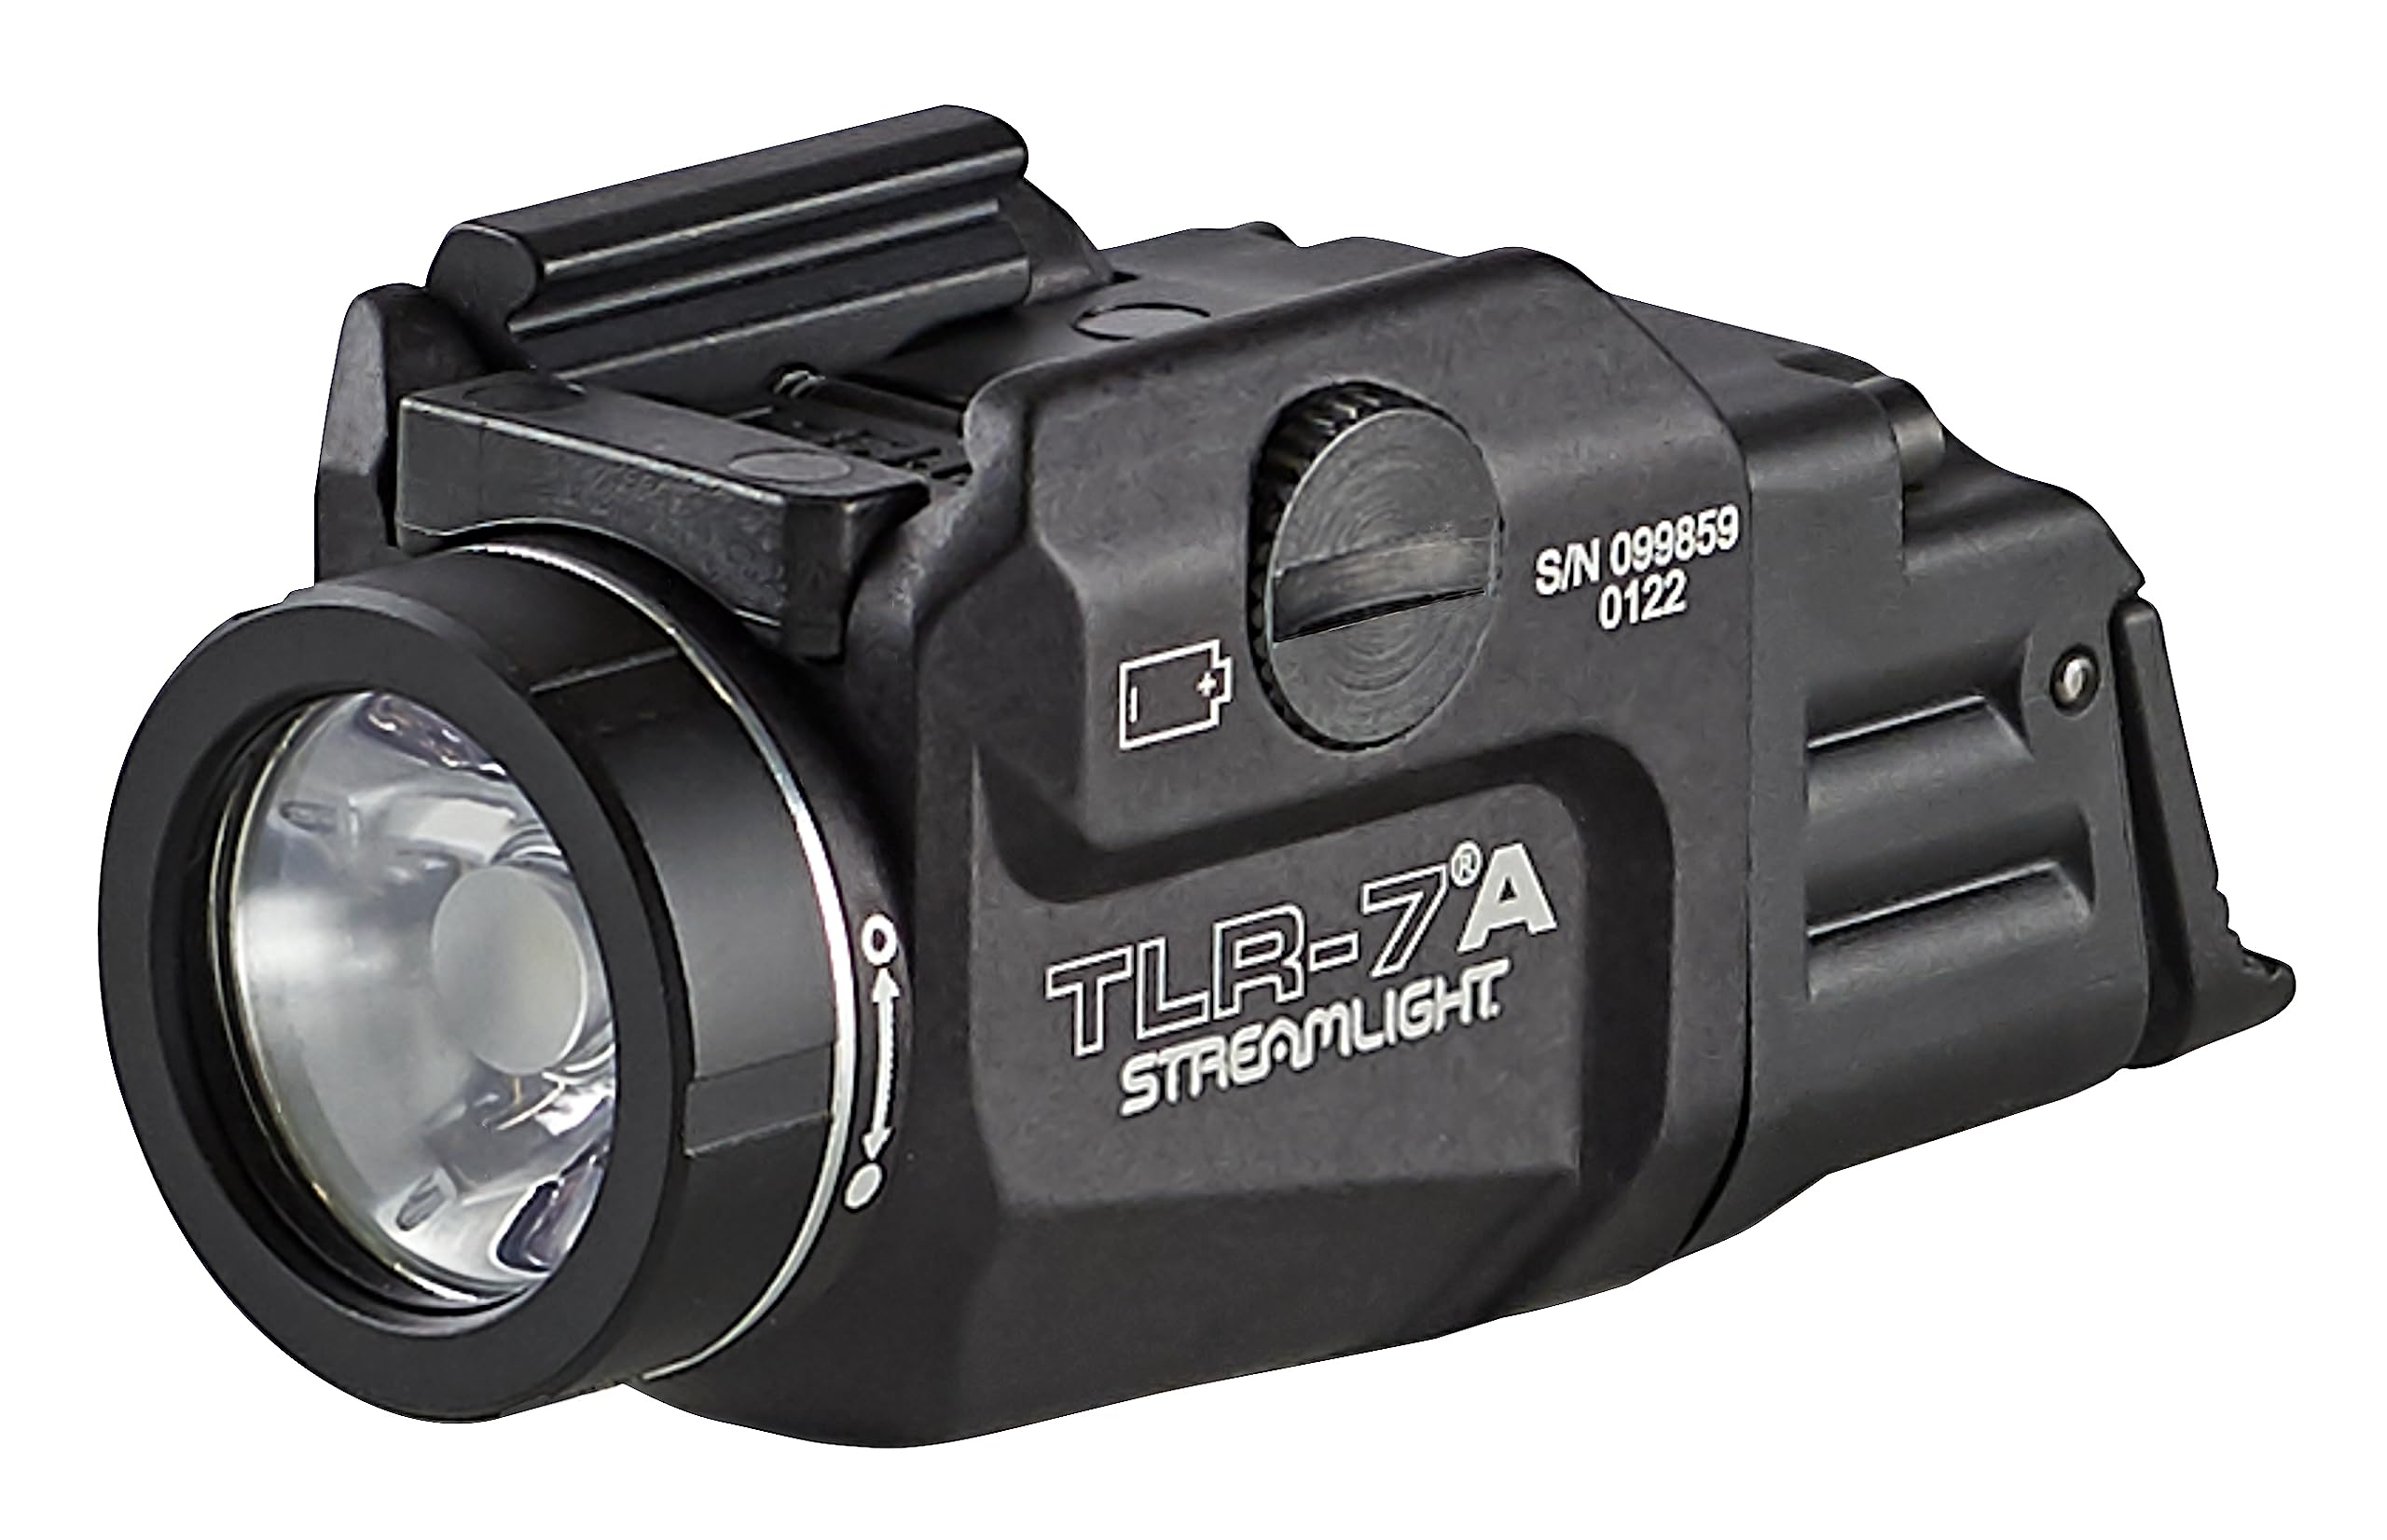 Streamlight 69424 TLR-7A Flex 500-Lumen Low-Profile Rail-Mounted Tactical Light, Includes High Switch Mounted on Light Plus Low Switch in Package, Battery and Key kit, Box, Black